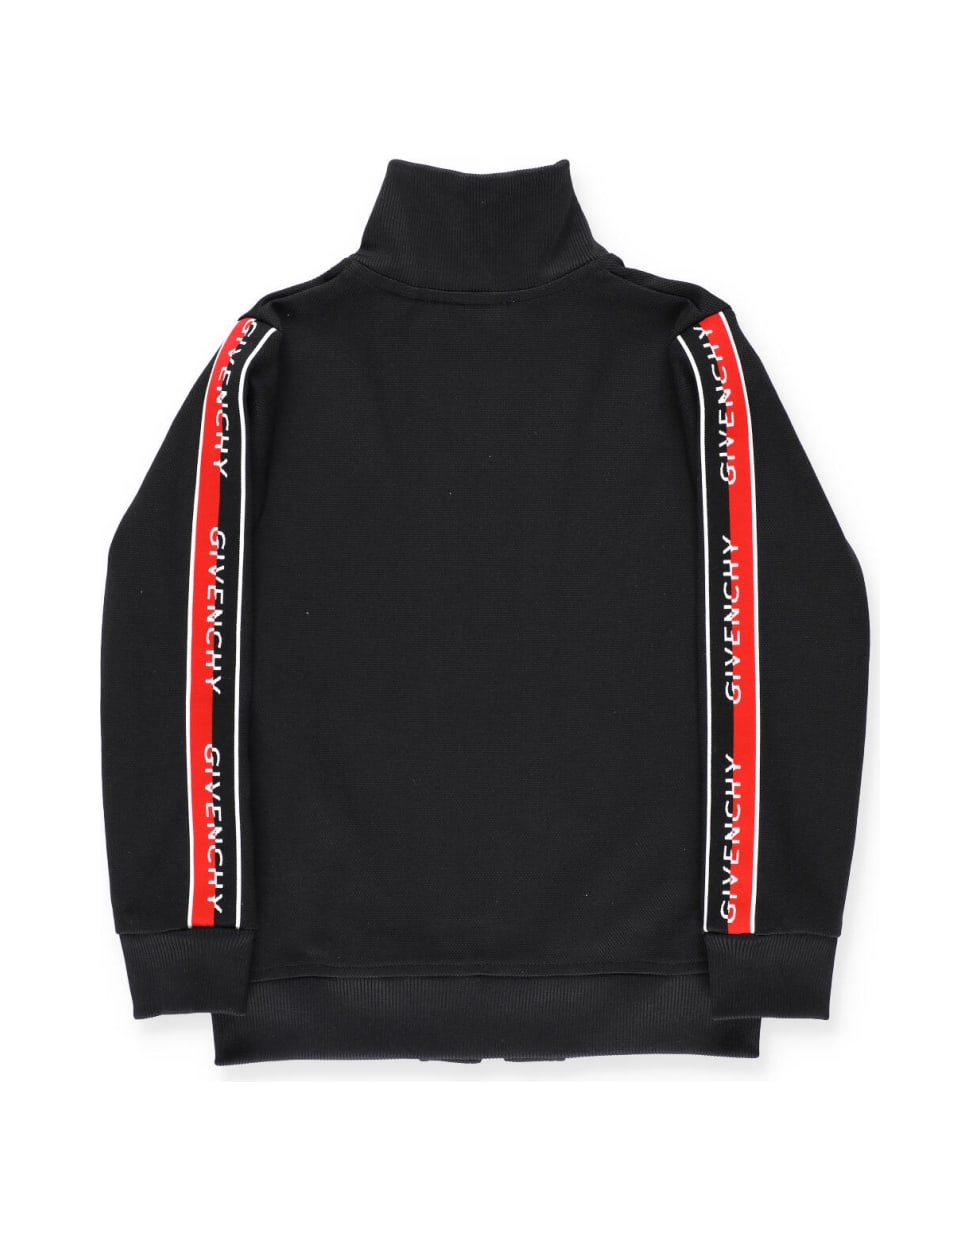 Givenchy Sweatshirt With Loged Band - Black